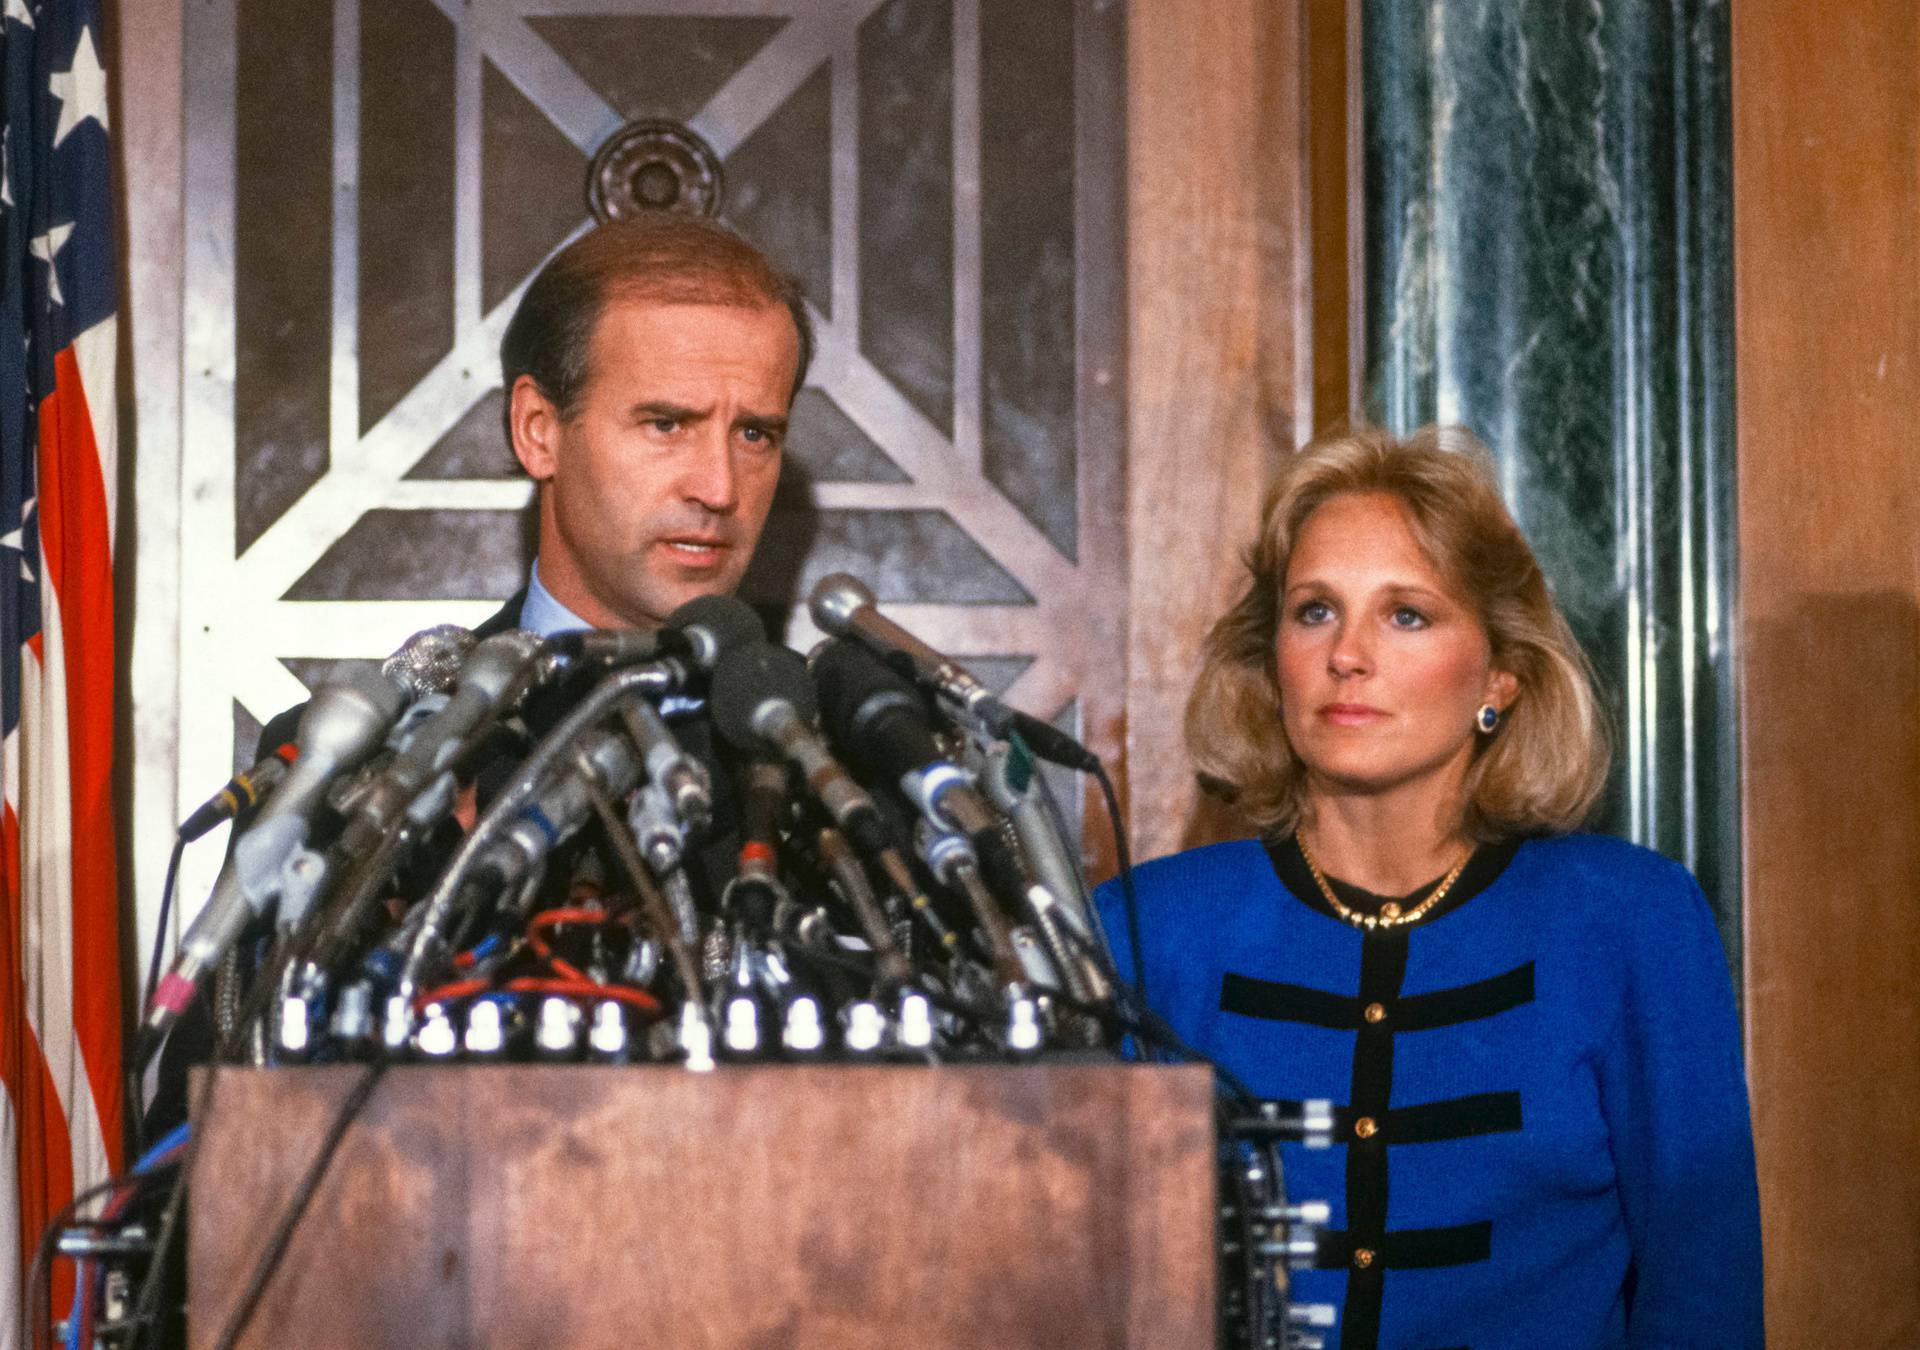 Biden Announces his Withdrawal from the Race for the 1988 Democratic Presidential Nomination